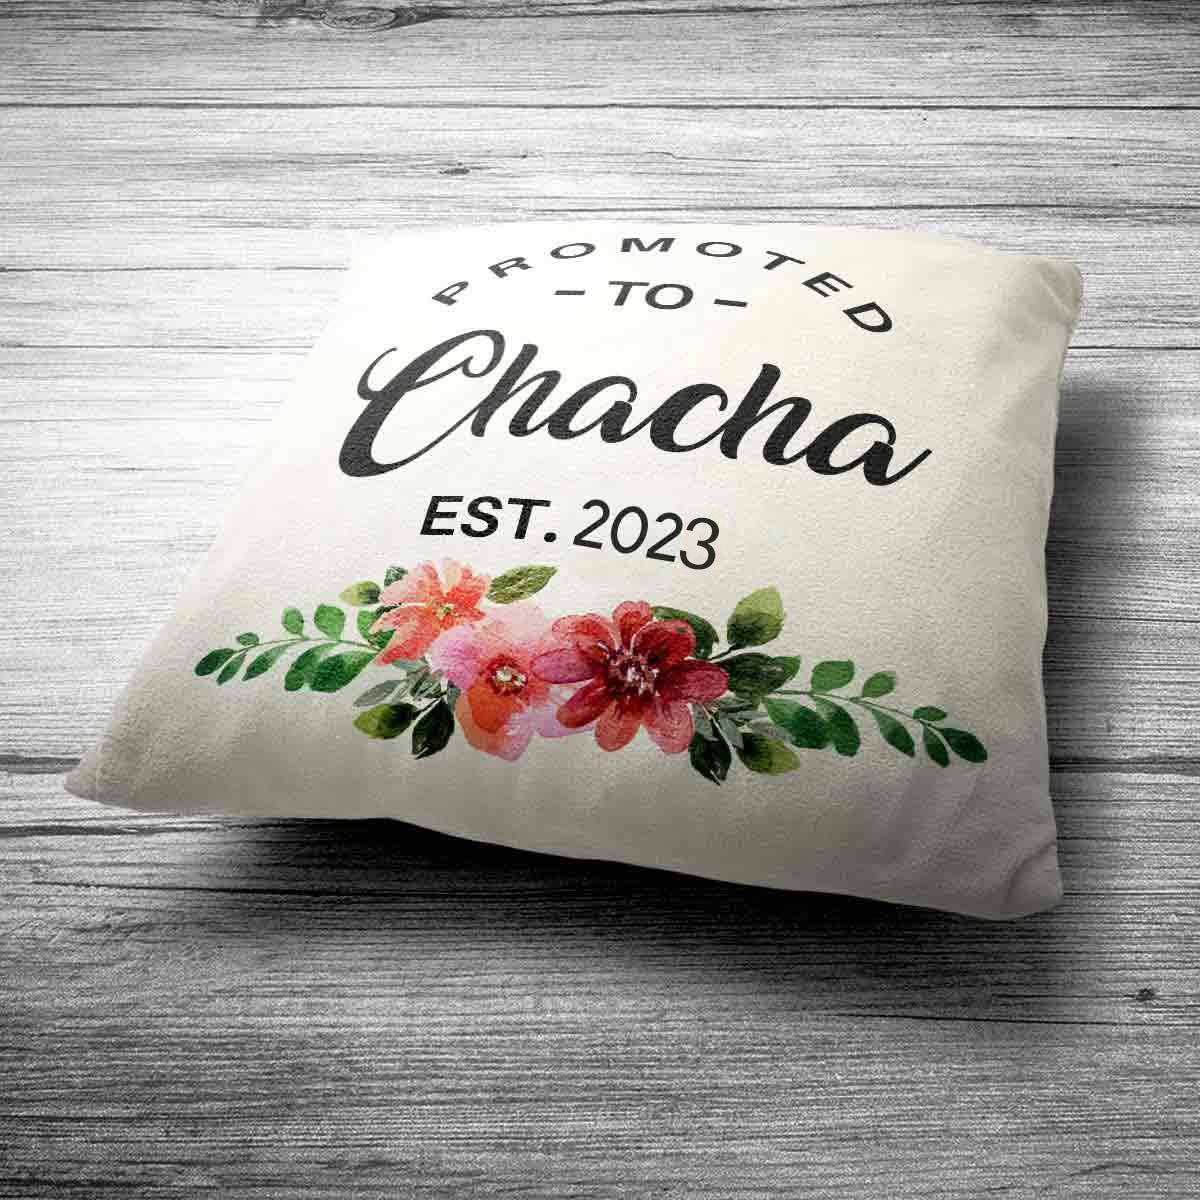 Personalised Promoted to Chacha Cushion